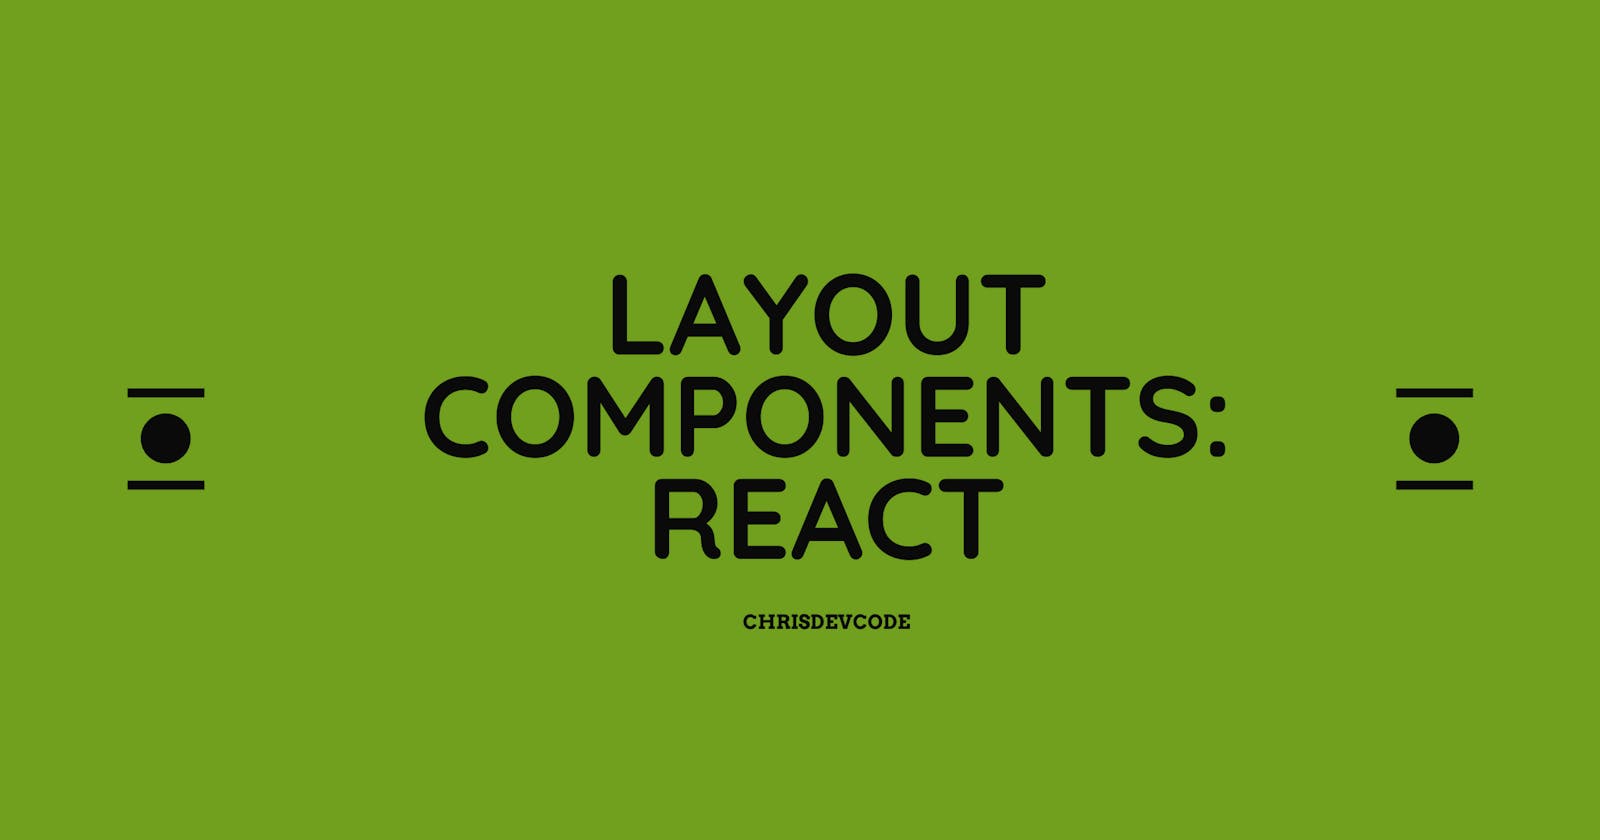 How To Create A Layout Component: React